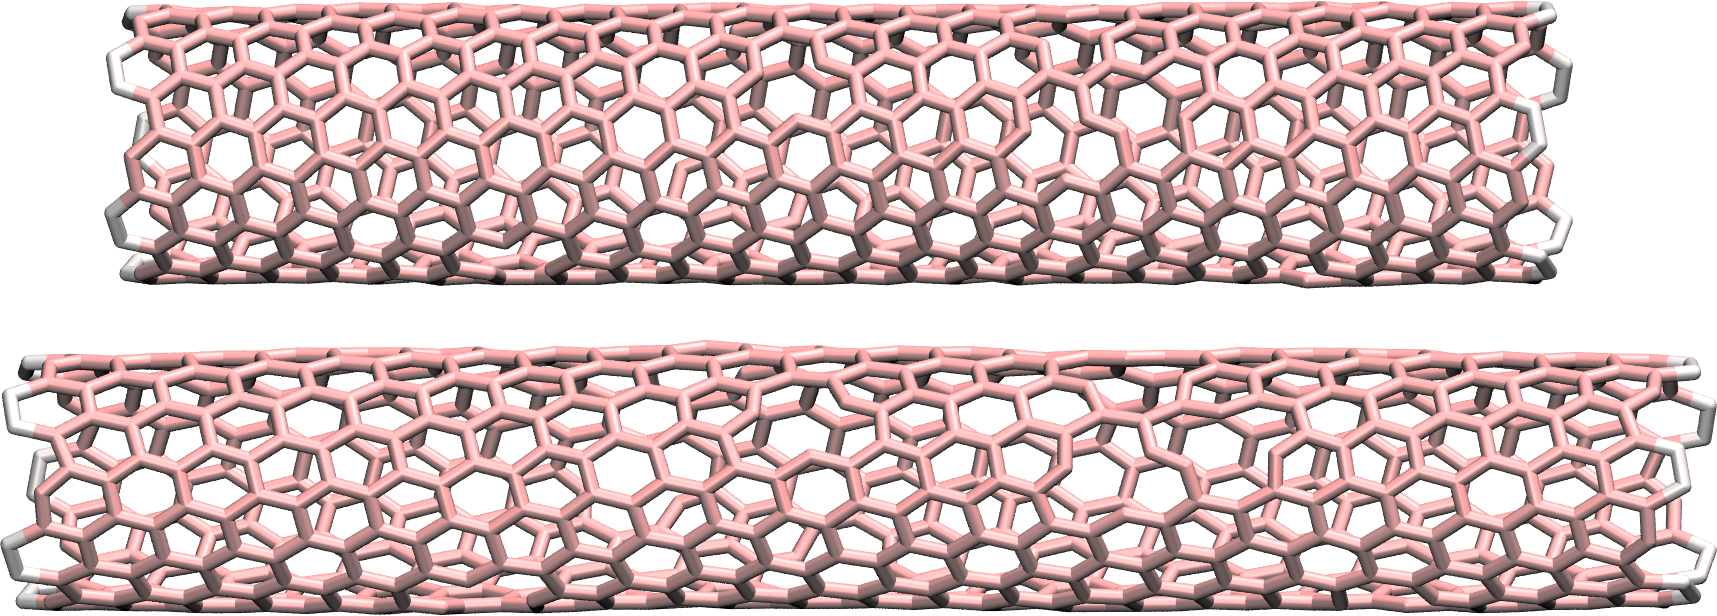 CNT in graphene in vacuum image VMD before and after deformation